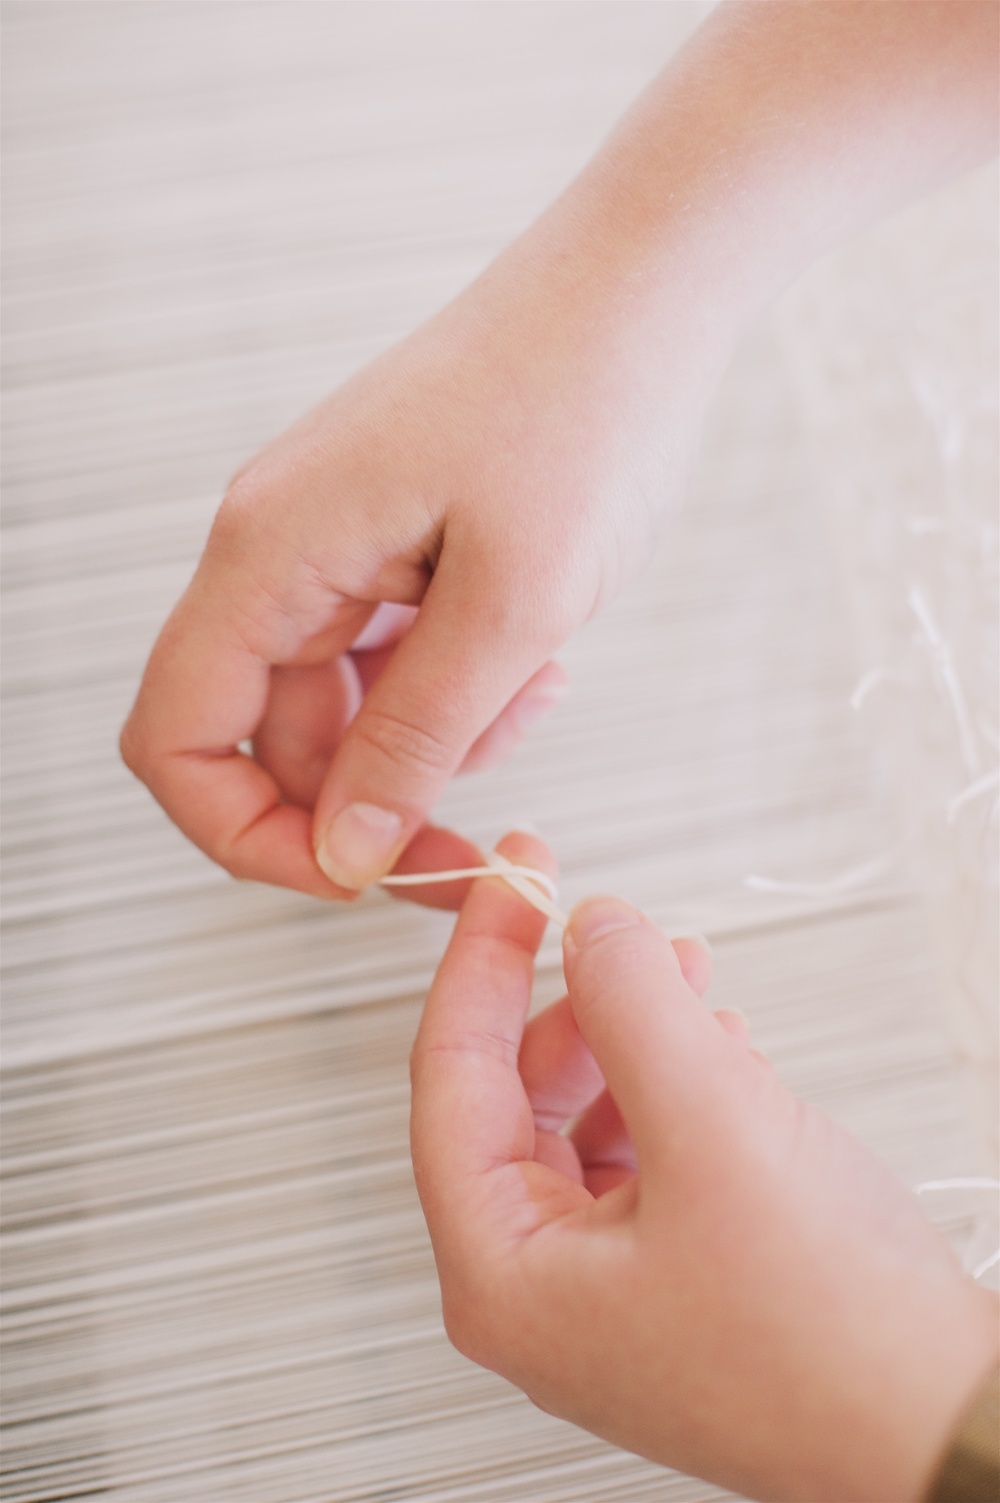 Tying a paper knot